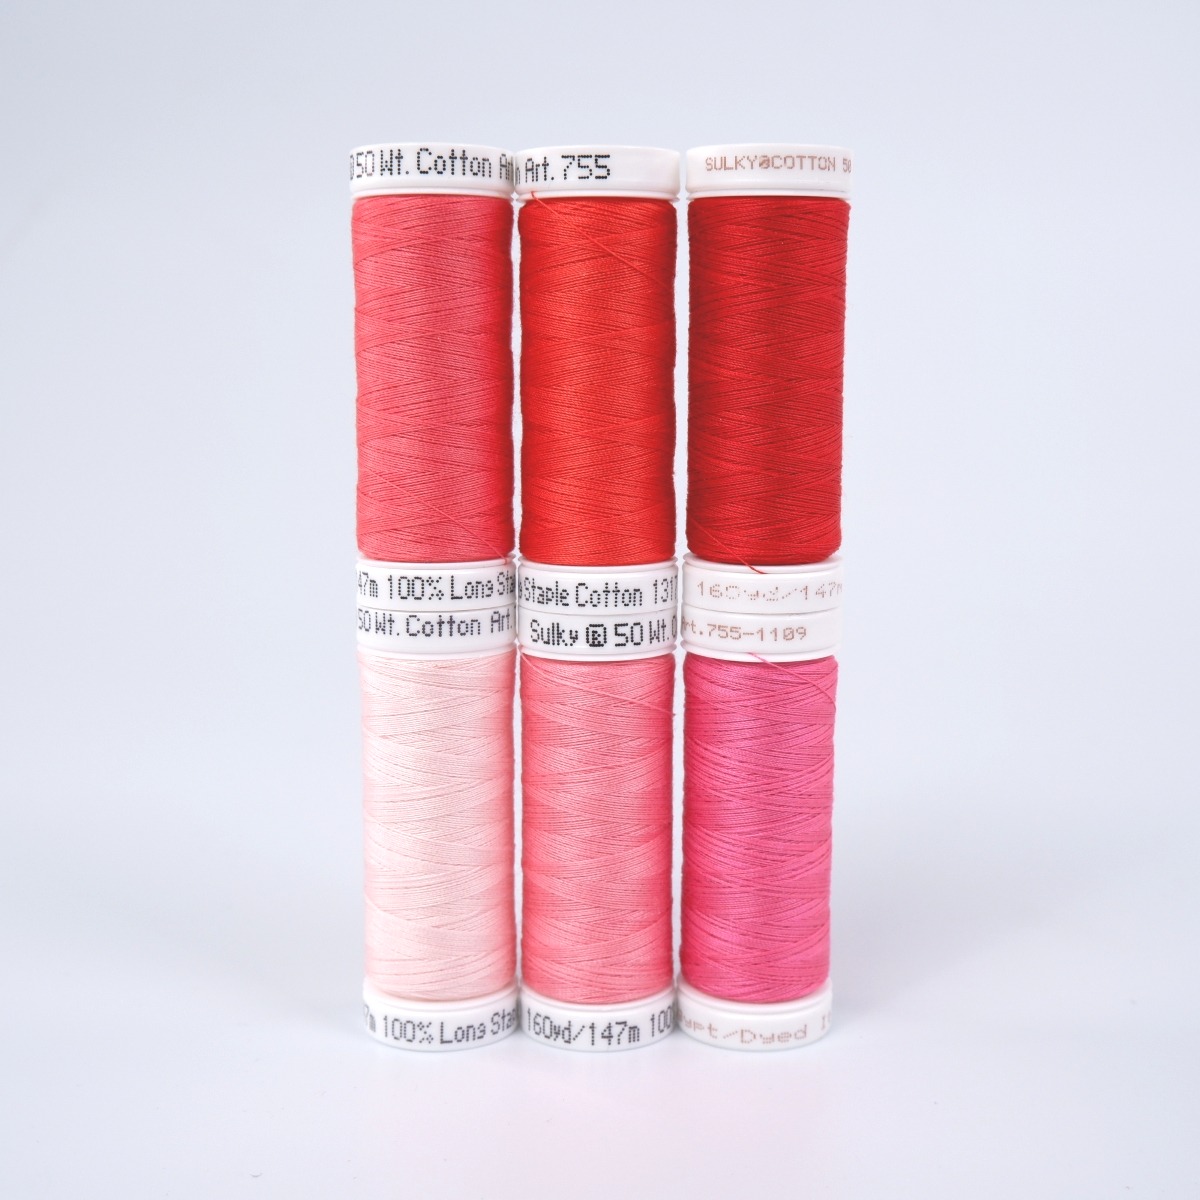 SULKY COTTON 50 - SWEETHEART (6x 147m
Snap Spools)